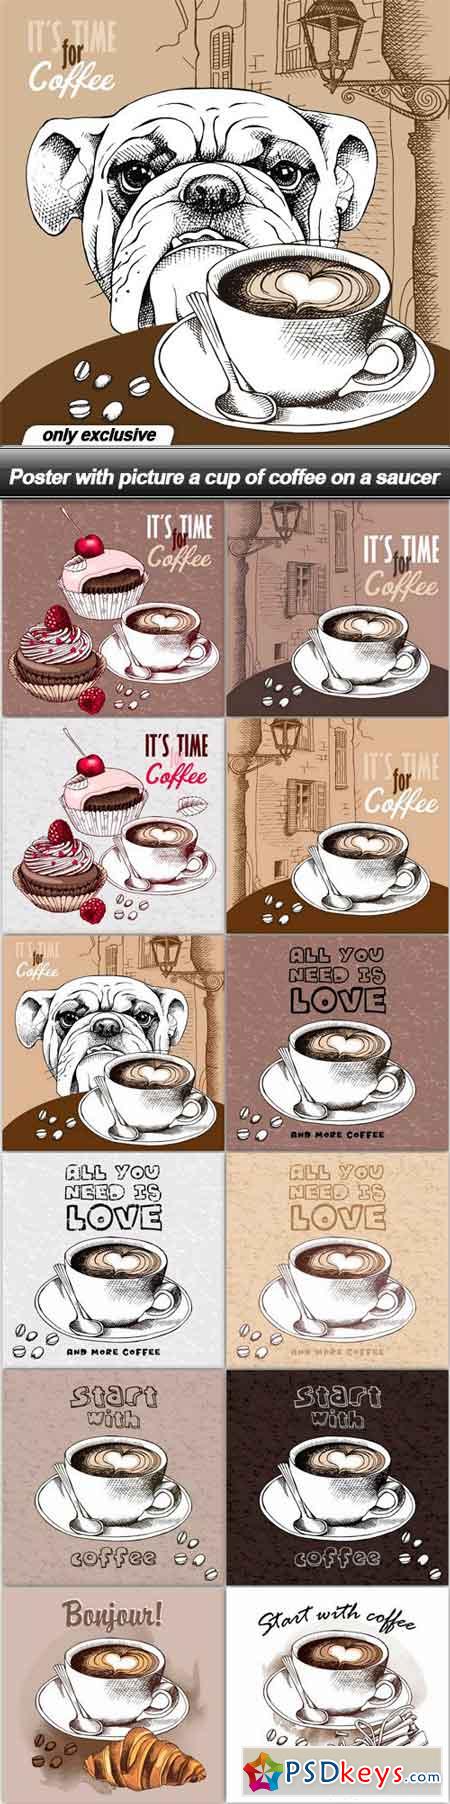 Poster with picture a cup of coffee on a saucer - 12 EPS